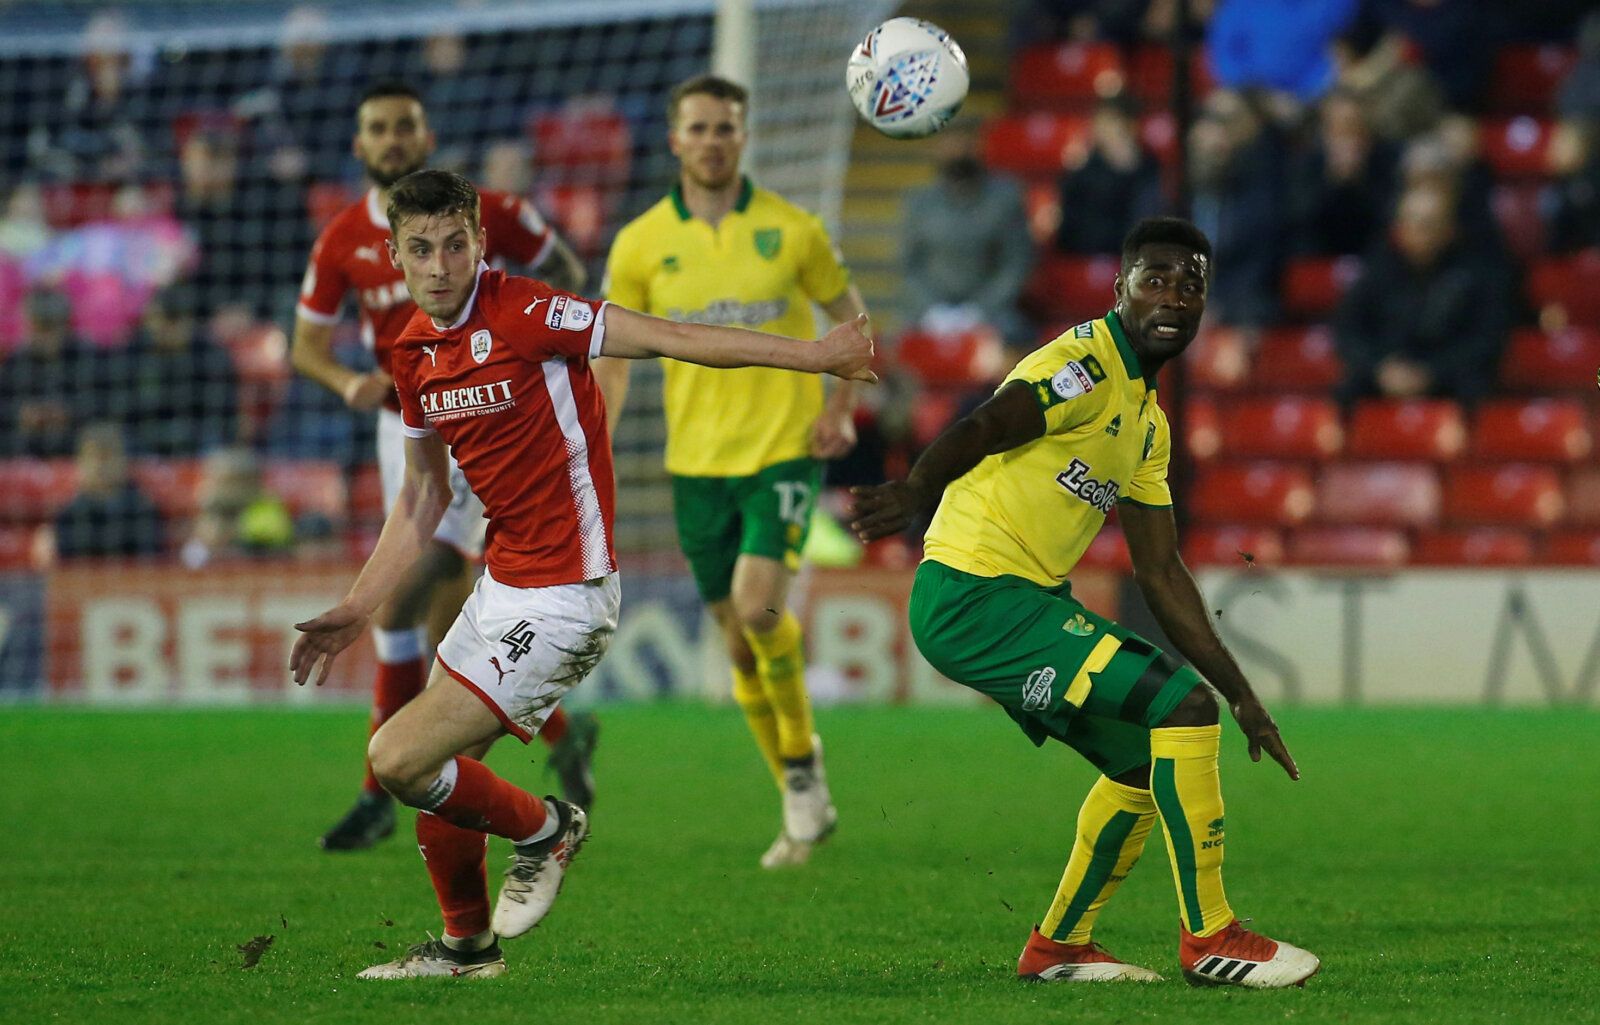 Soccer Football - Championship - Barnsley vs Norwich City - Oakwell, Barnsley, Britain - March 13, 2018   Barnsley's Joe Williams (L) in action with Norwich City's Alexander Tettey   Action Images/Craig Brough    EDITORIAL USE ONLY. No use with unauthorized audio, video, data, fixture lists, club/league logos or 